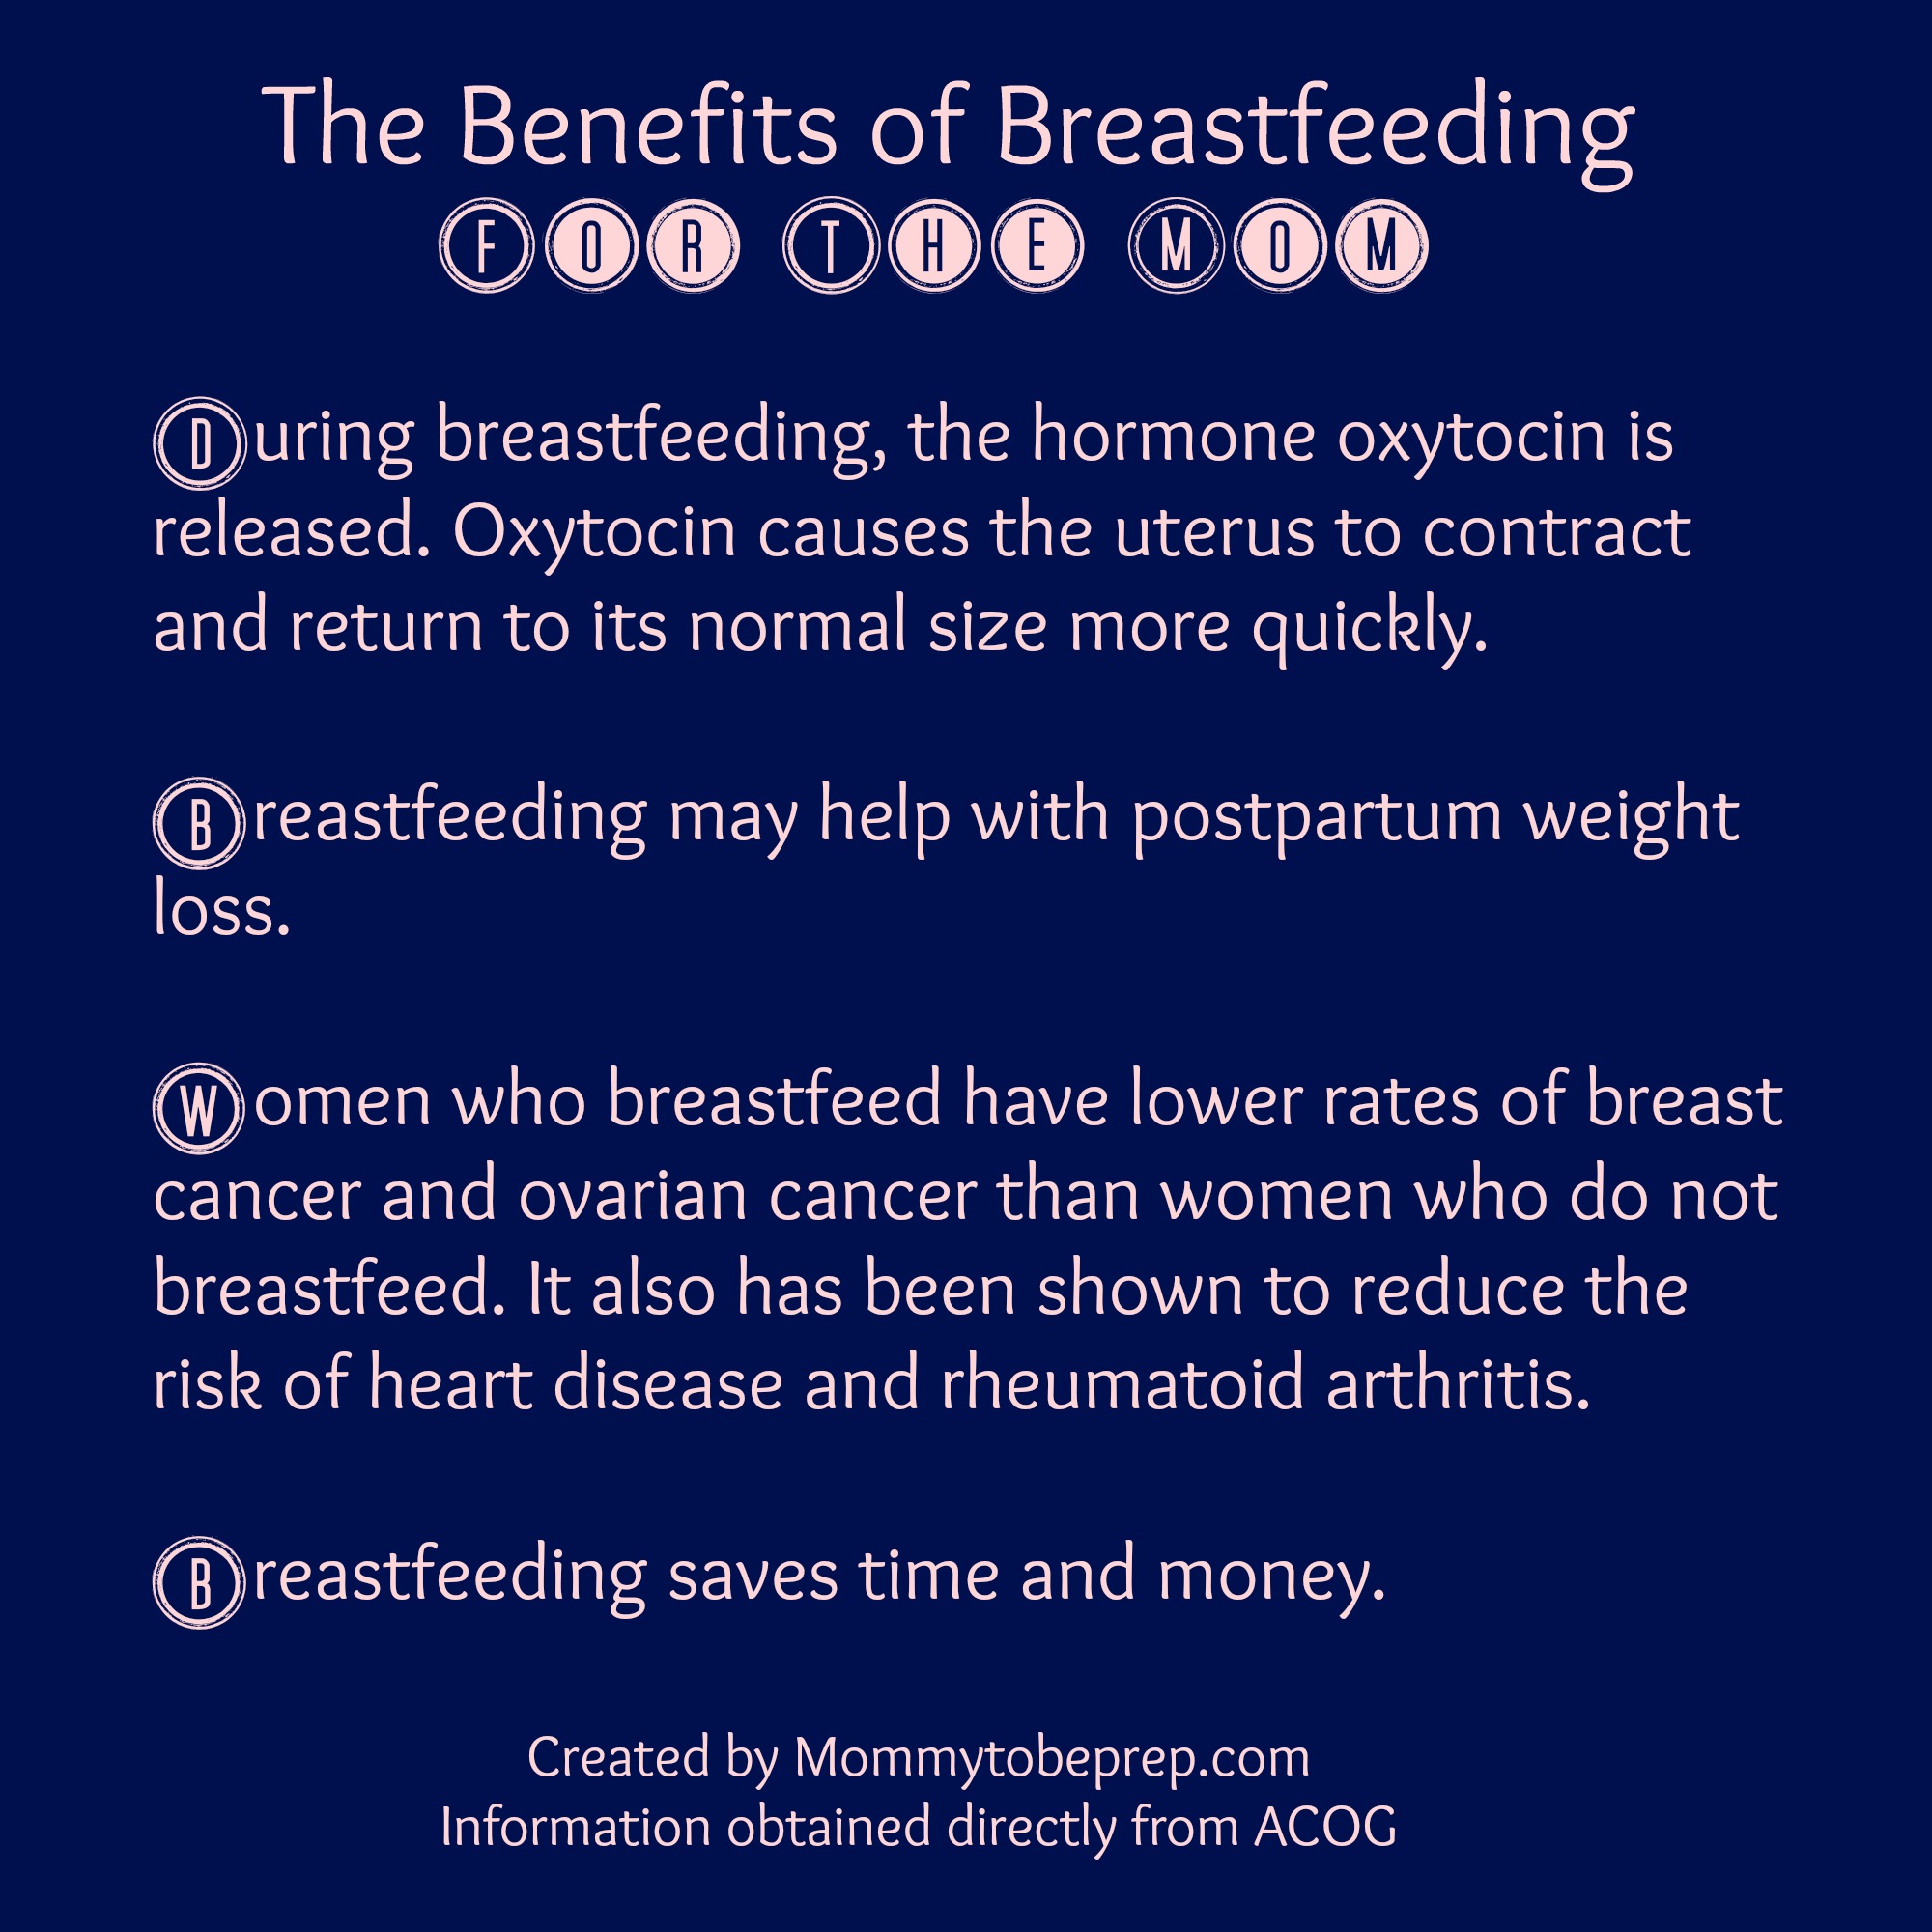 The Benefits of Breastfeeding For The Mom